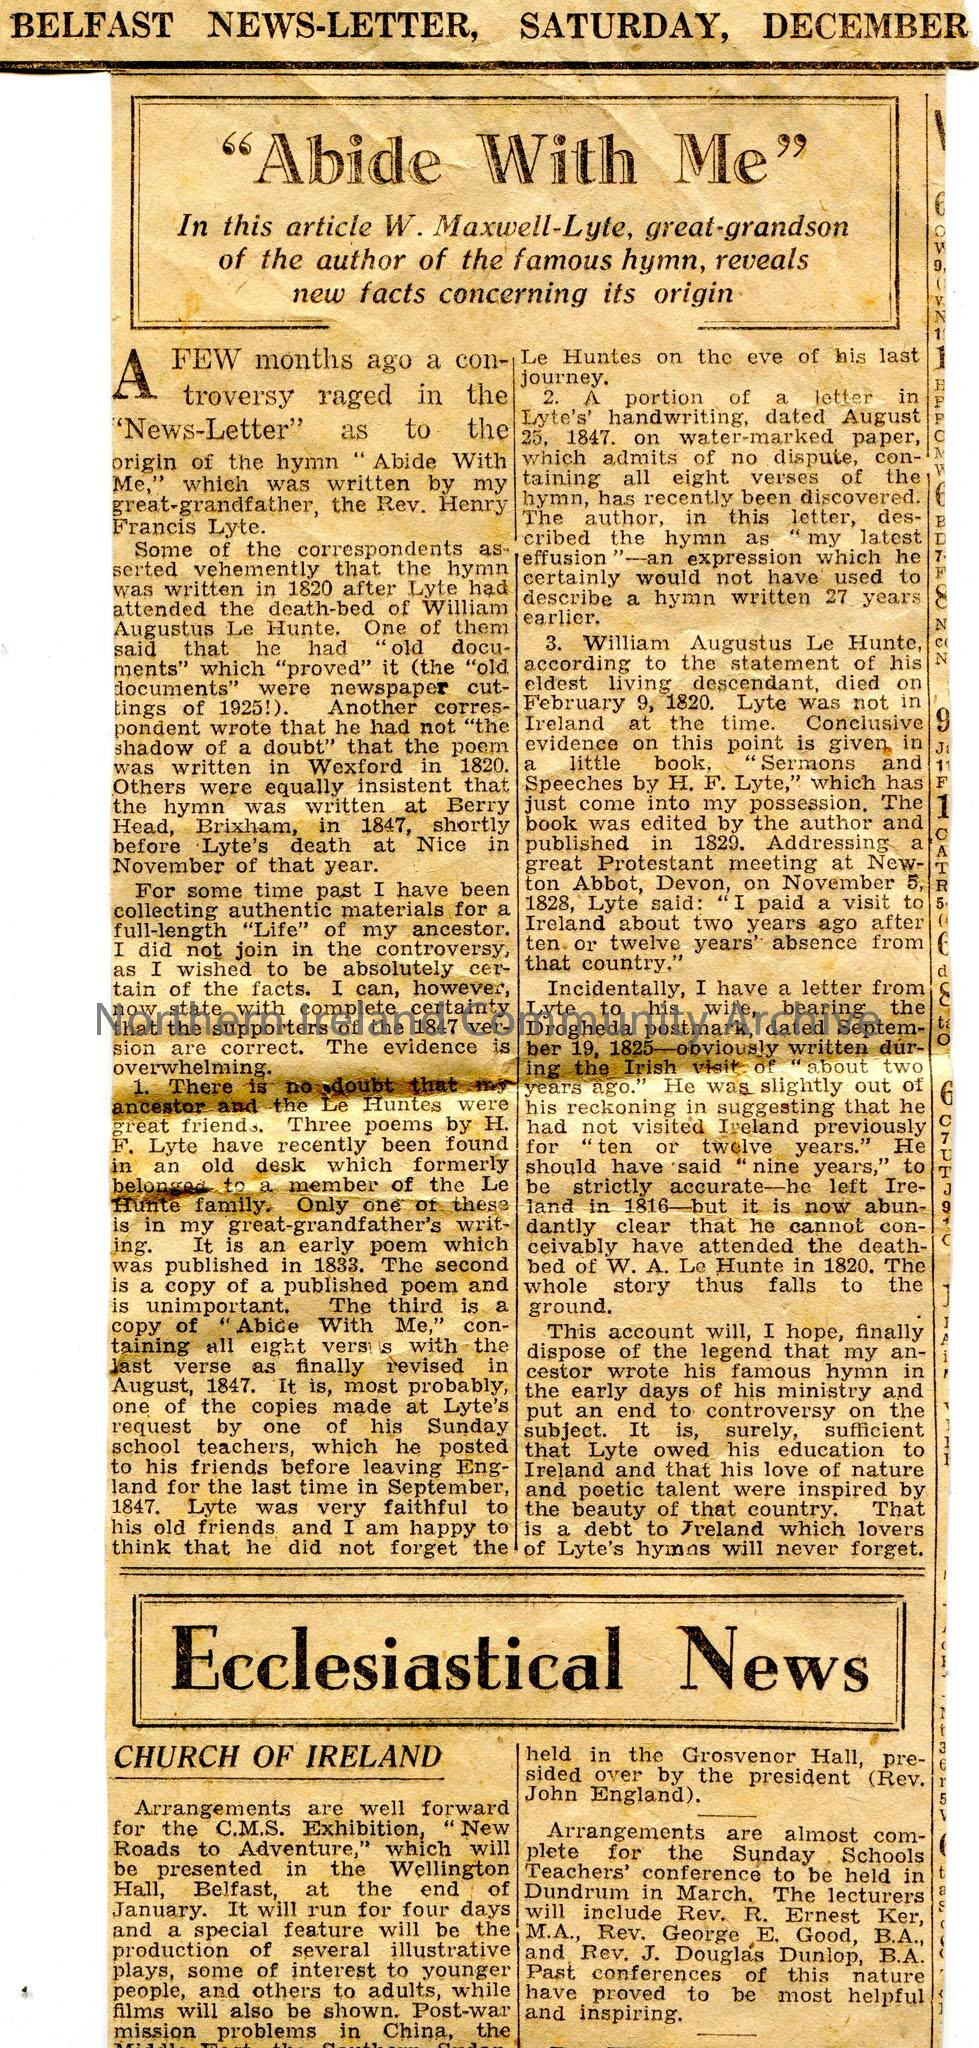 Newspaper cutting from the Belfast News-Letter, Saturday 27th December, 1947. Article titled, “King’s Broadcast, Confidence in Britain’s future”. Arti… – img024c